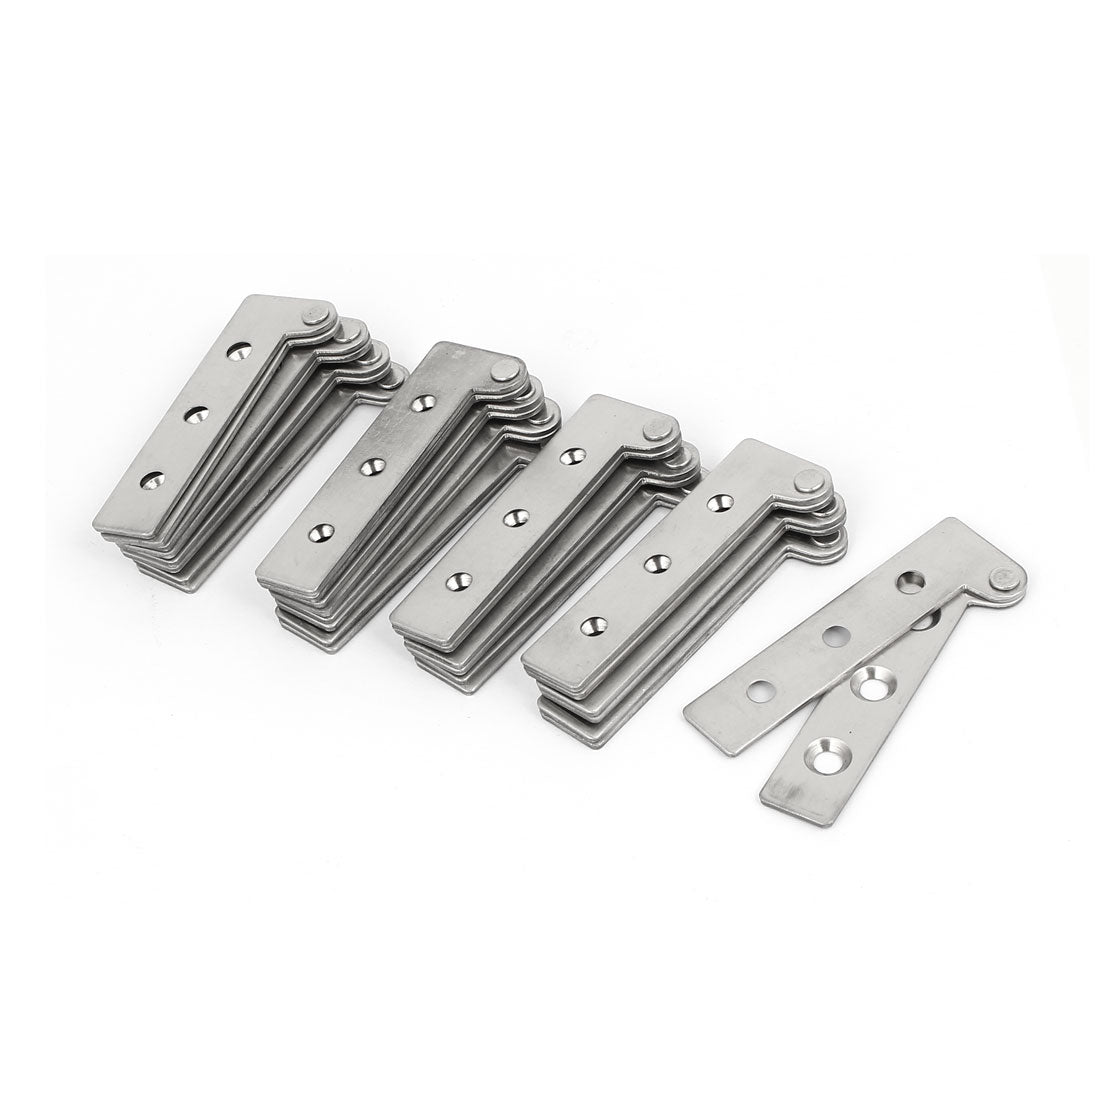 uxcell Uxcell Cabinet Door Box Stainless Steel Inset Offset Pivot Hinge 64mm x 21.5mm 15PCS